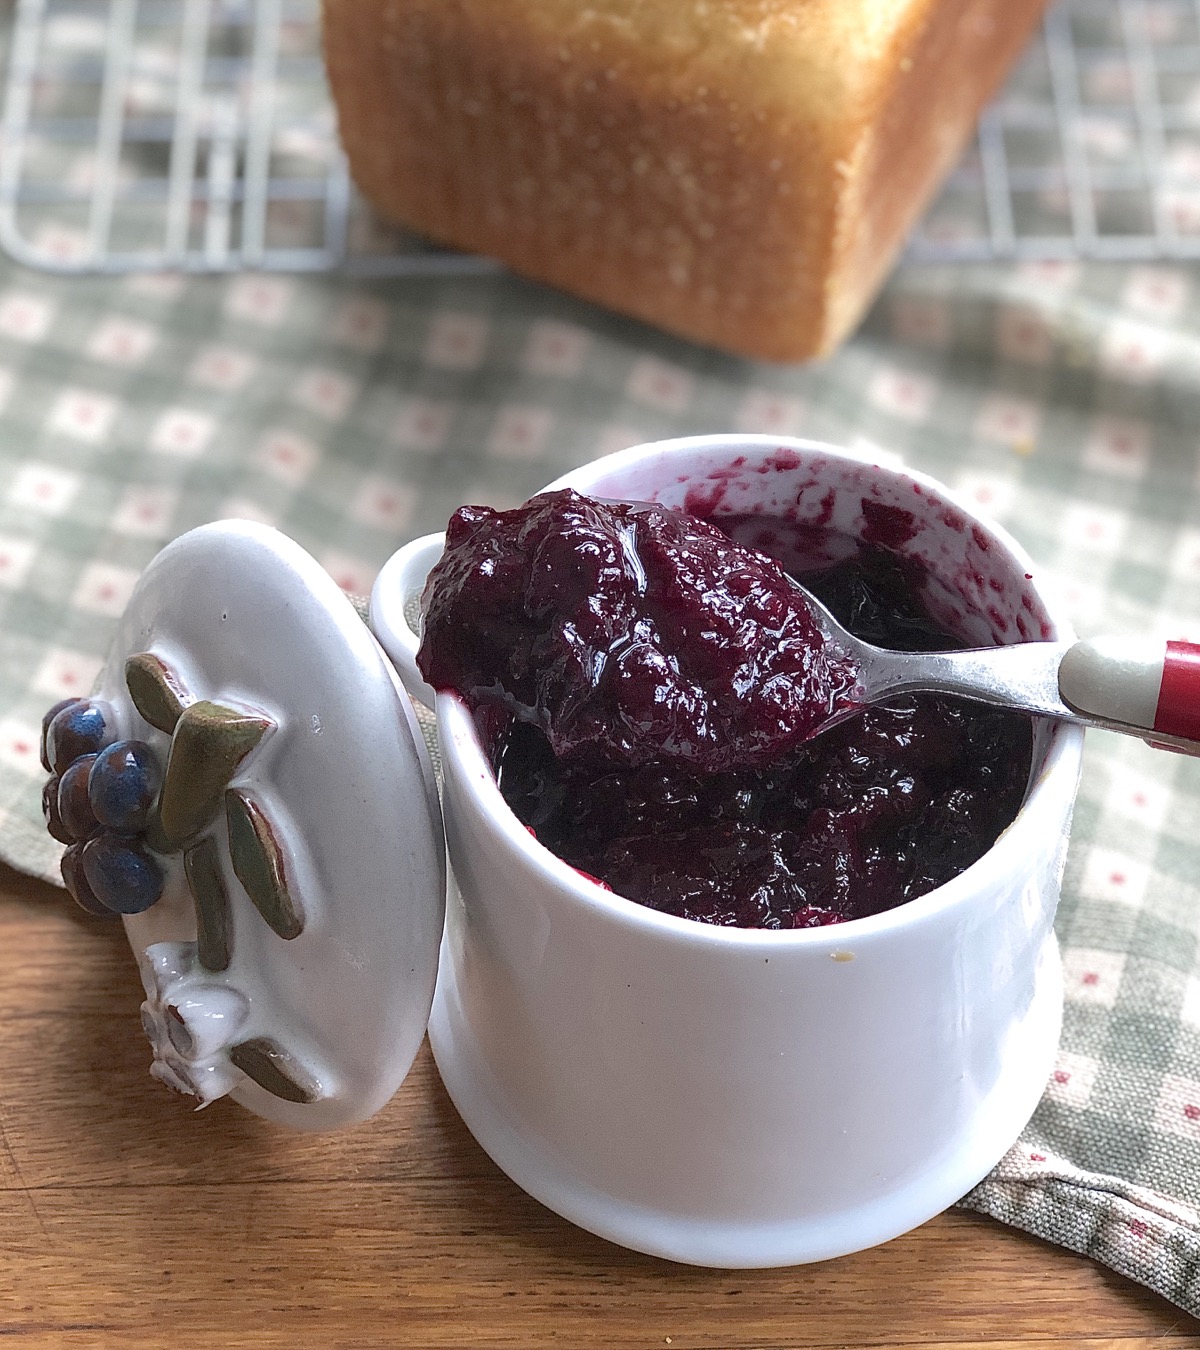 Jam jar or blueberry jam with decorative lid and spoon.